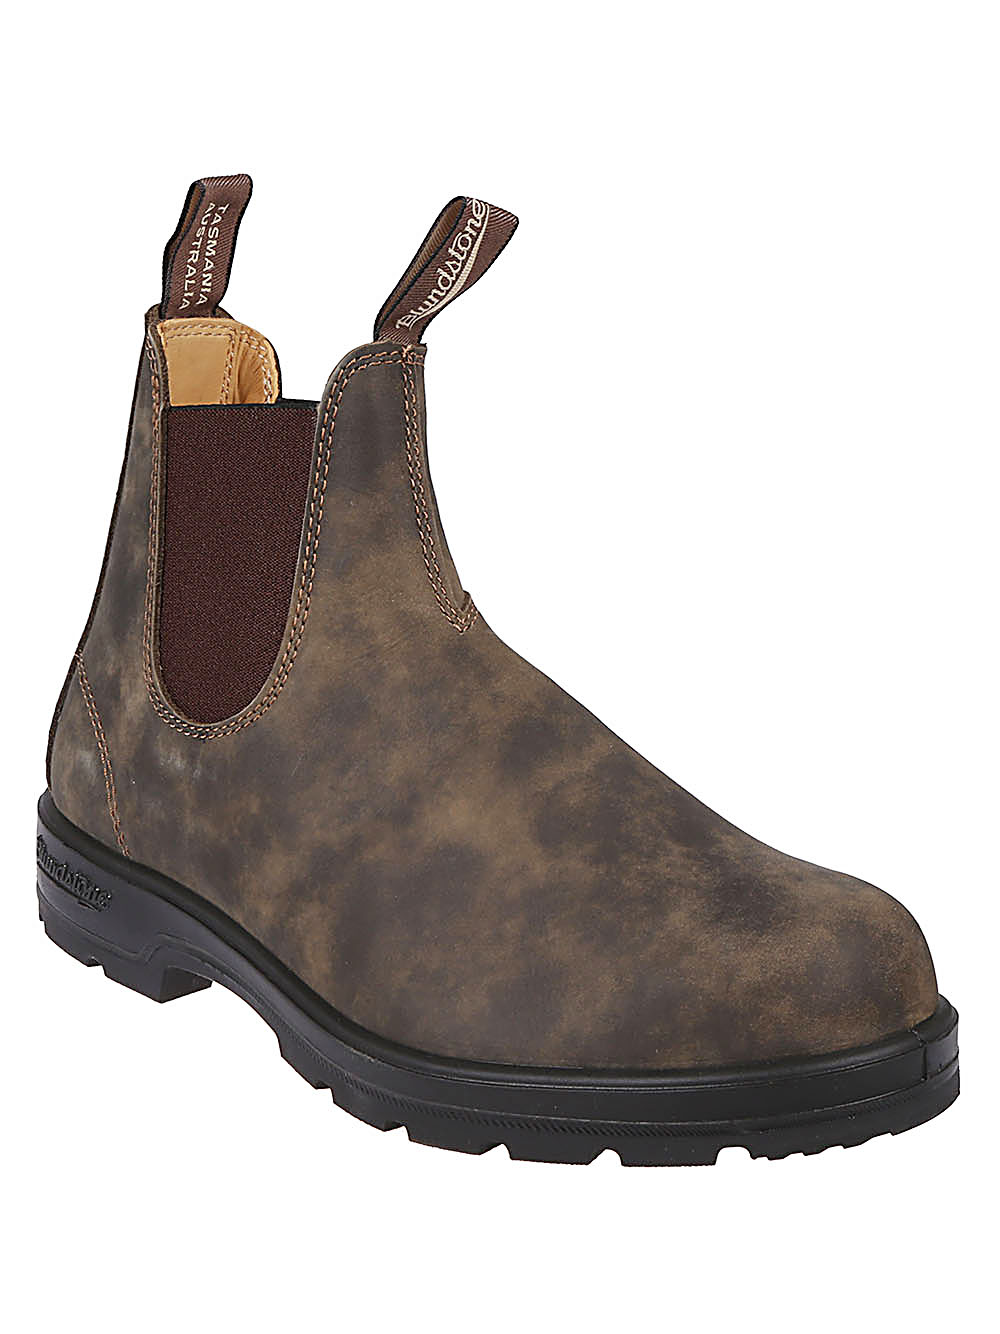 Blundstone BLUNDSTONE- 585 Leather Chelsea Boots